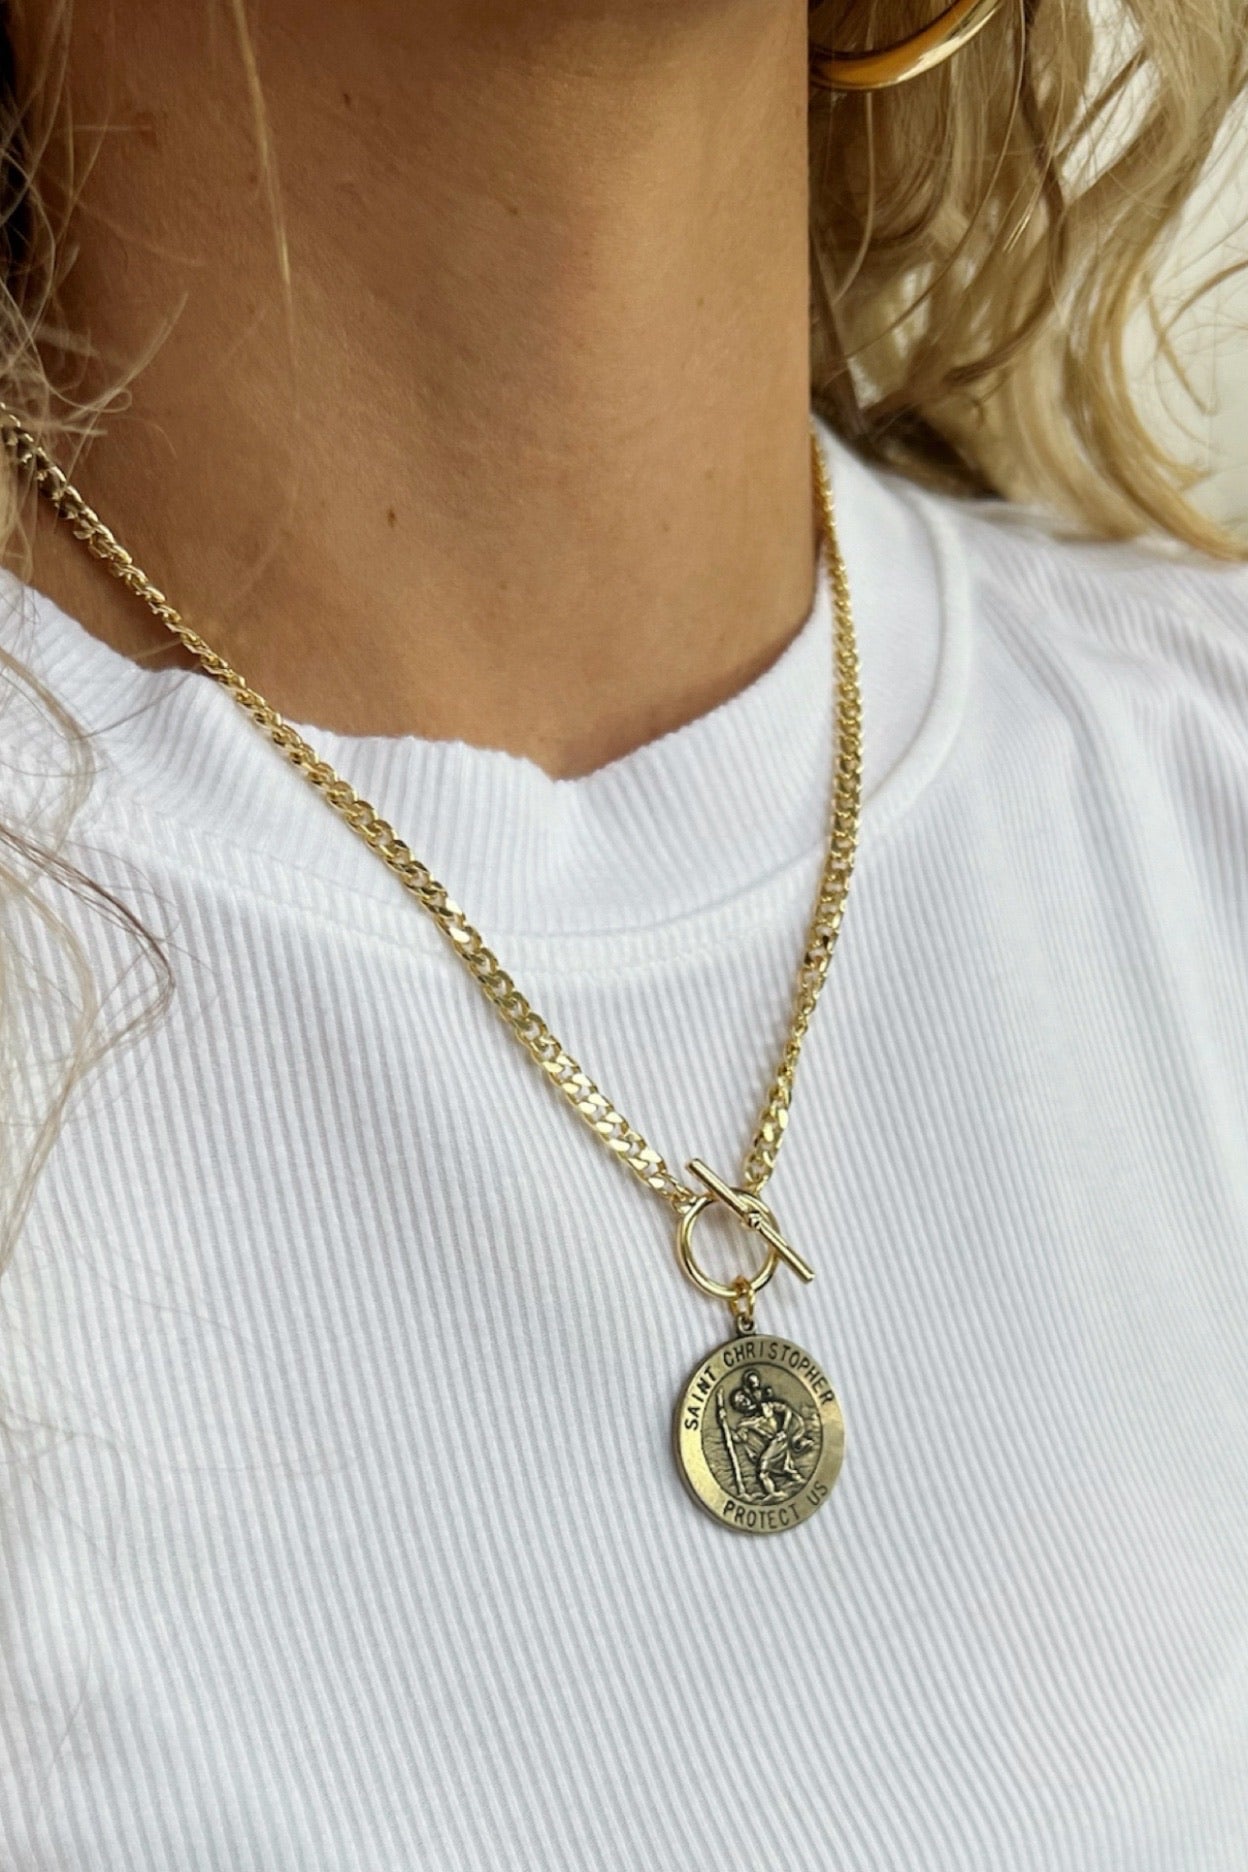 Lula n' Lee Gold Saint Christopher Necklace Lux Collection